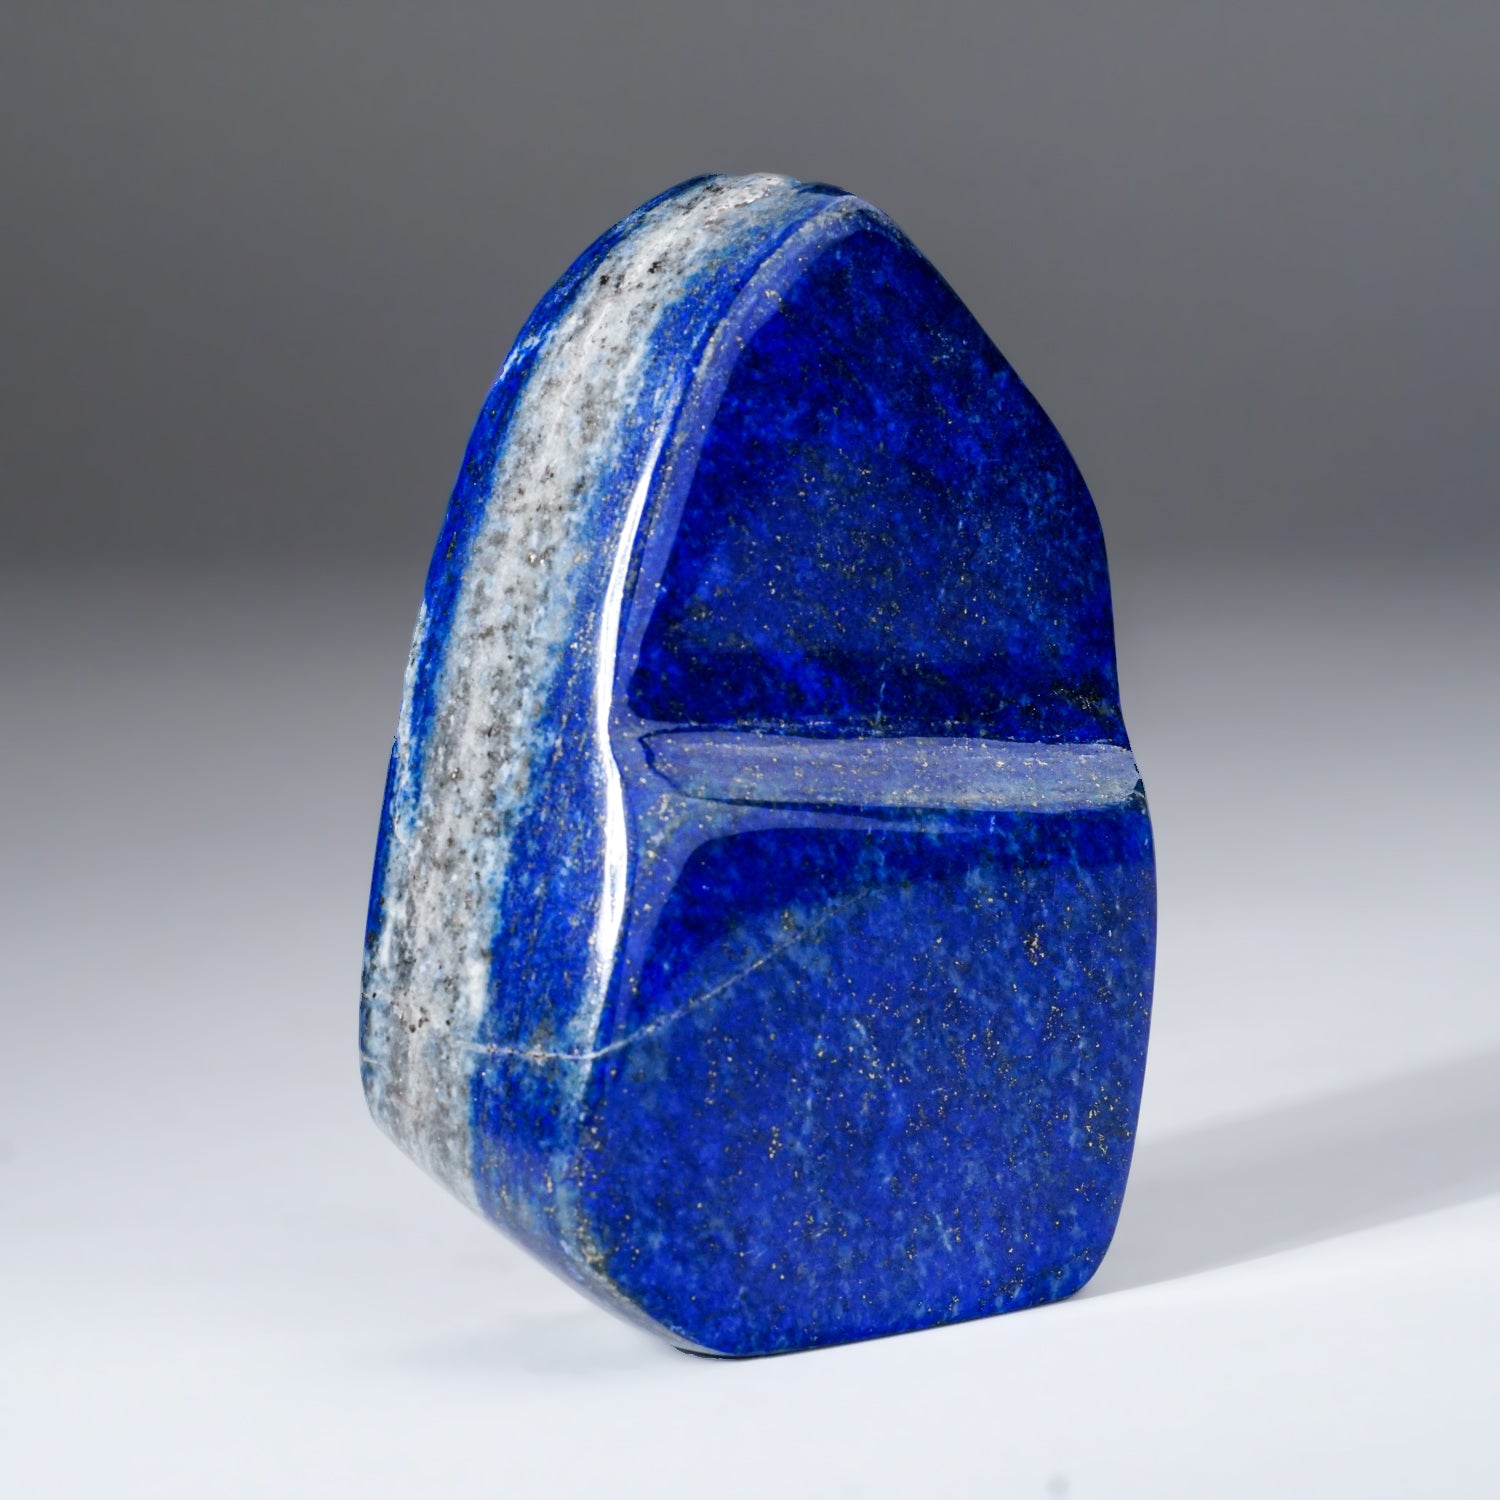 Polished Lapis Lazuli Freeform from Afghanistan (379 grams)